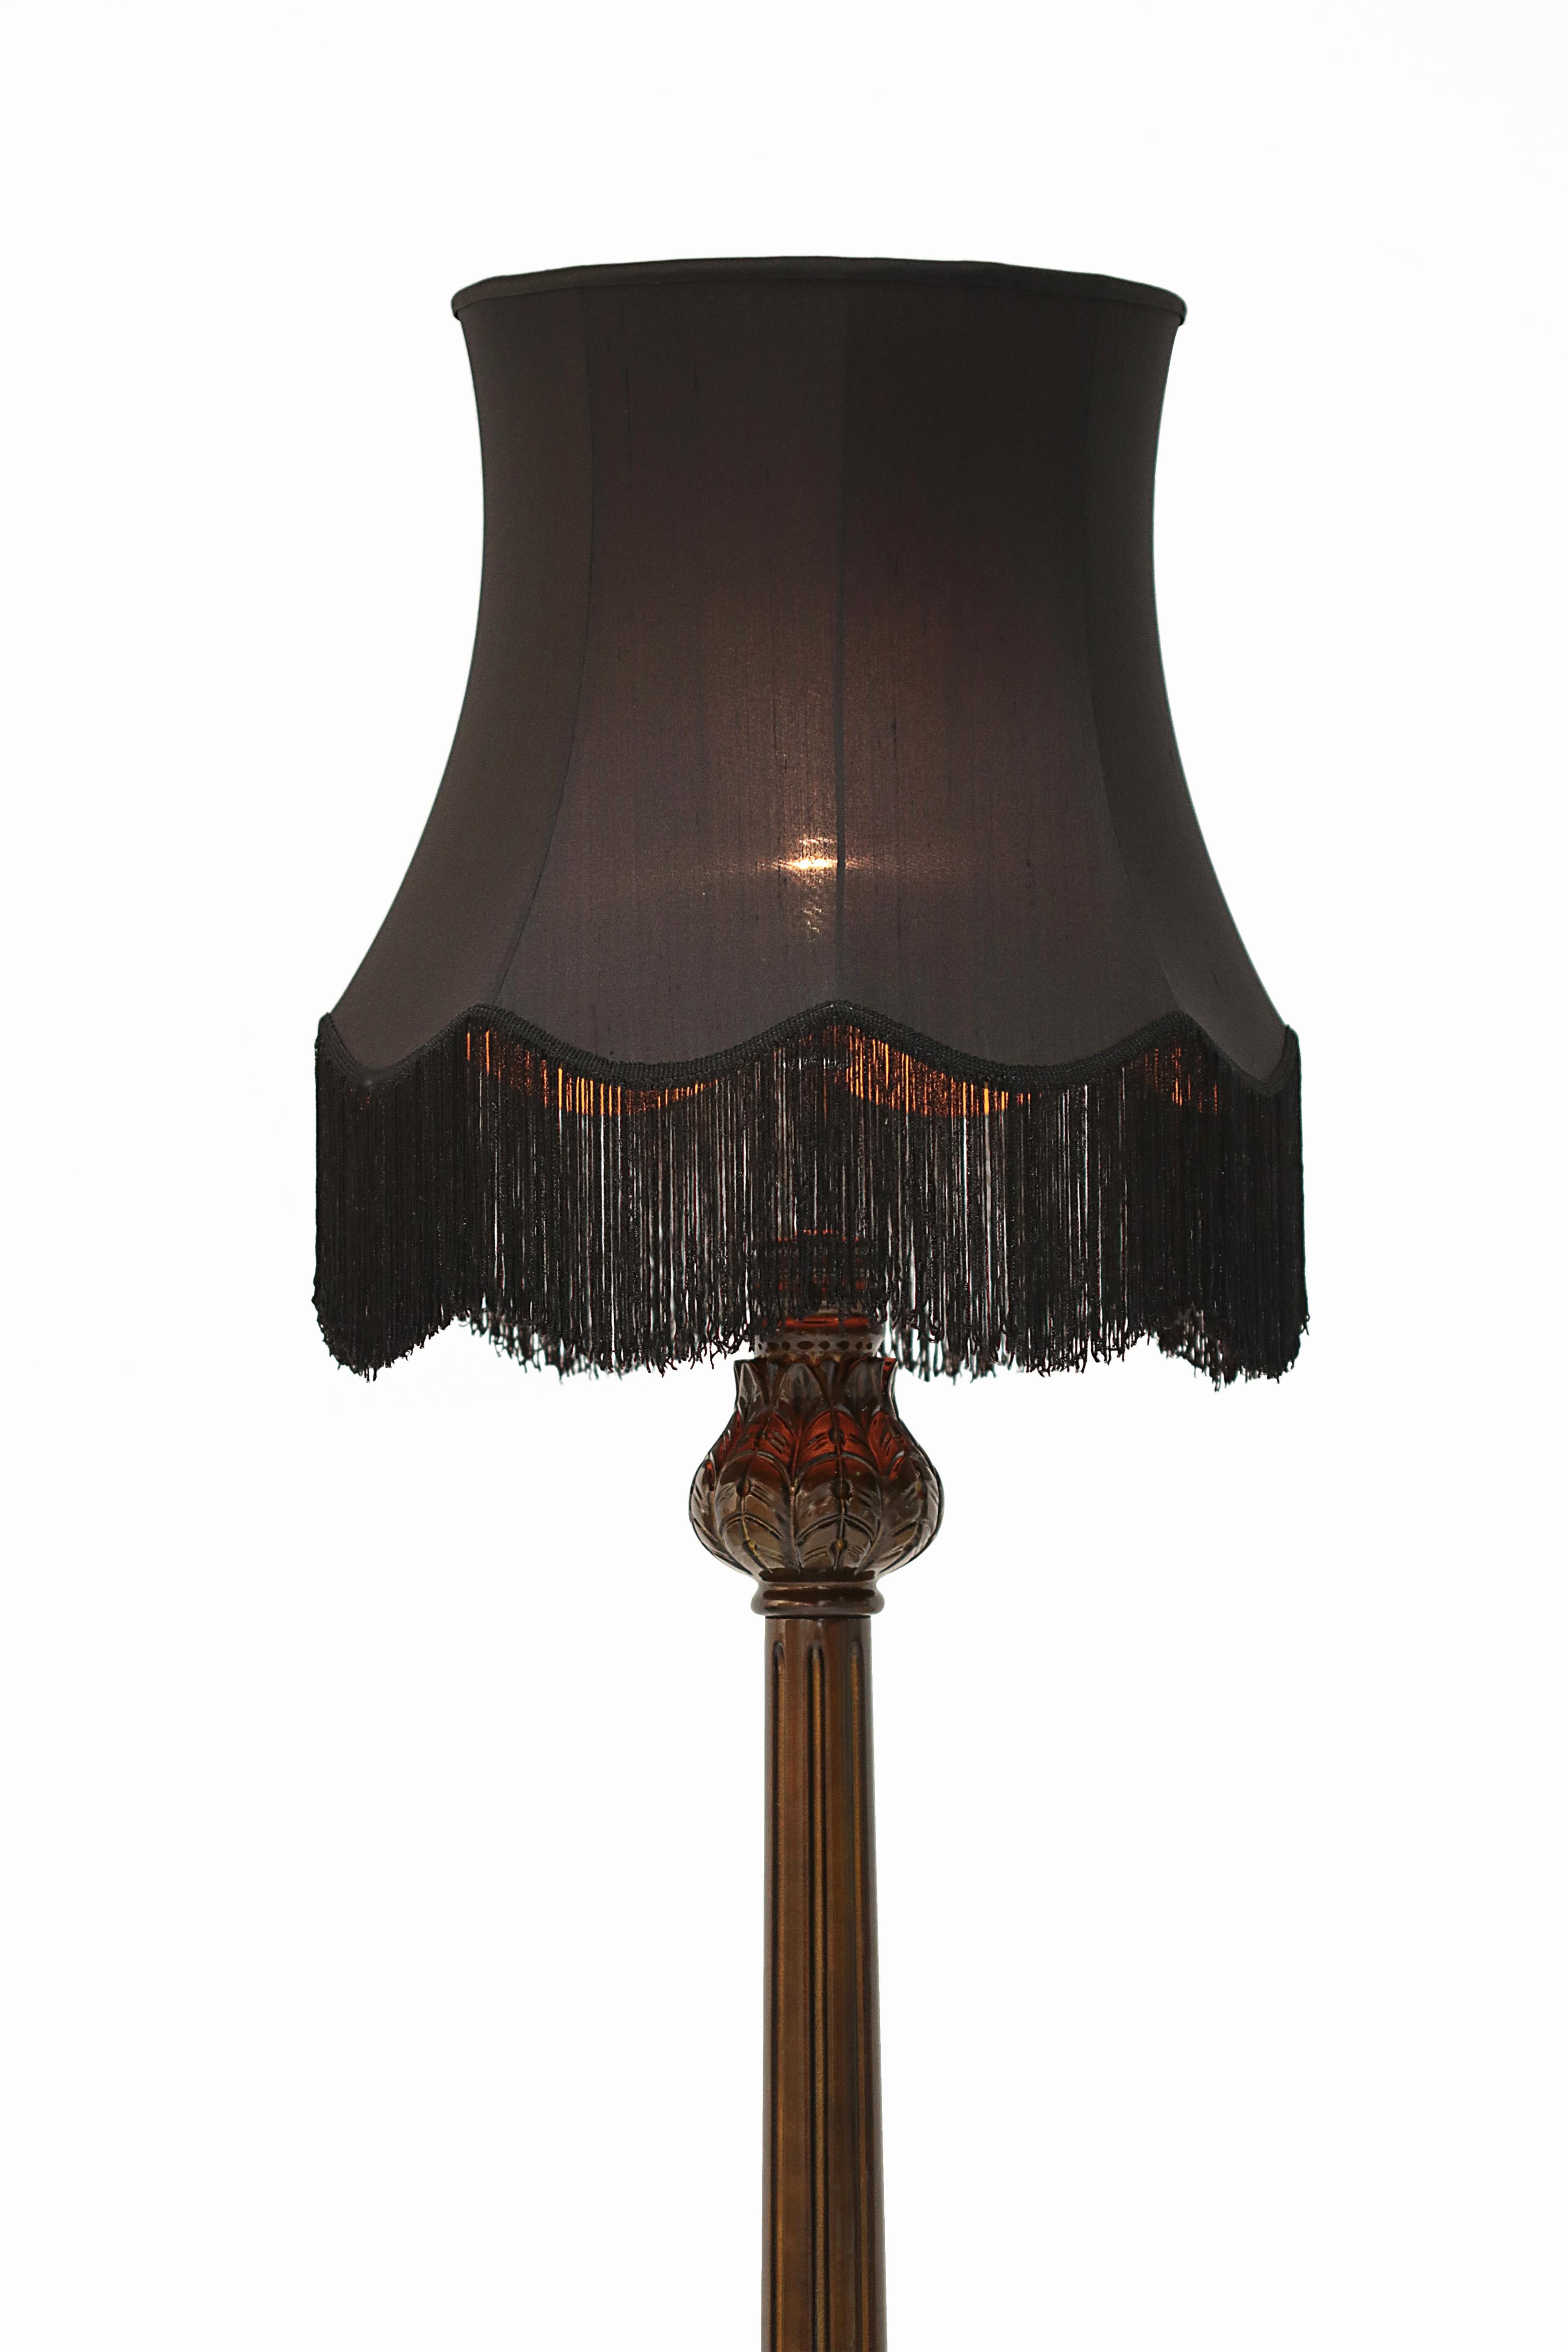 Other Lotus Floor Lamp For Sale